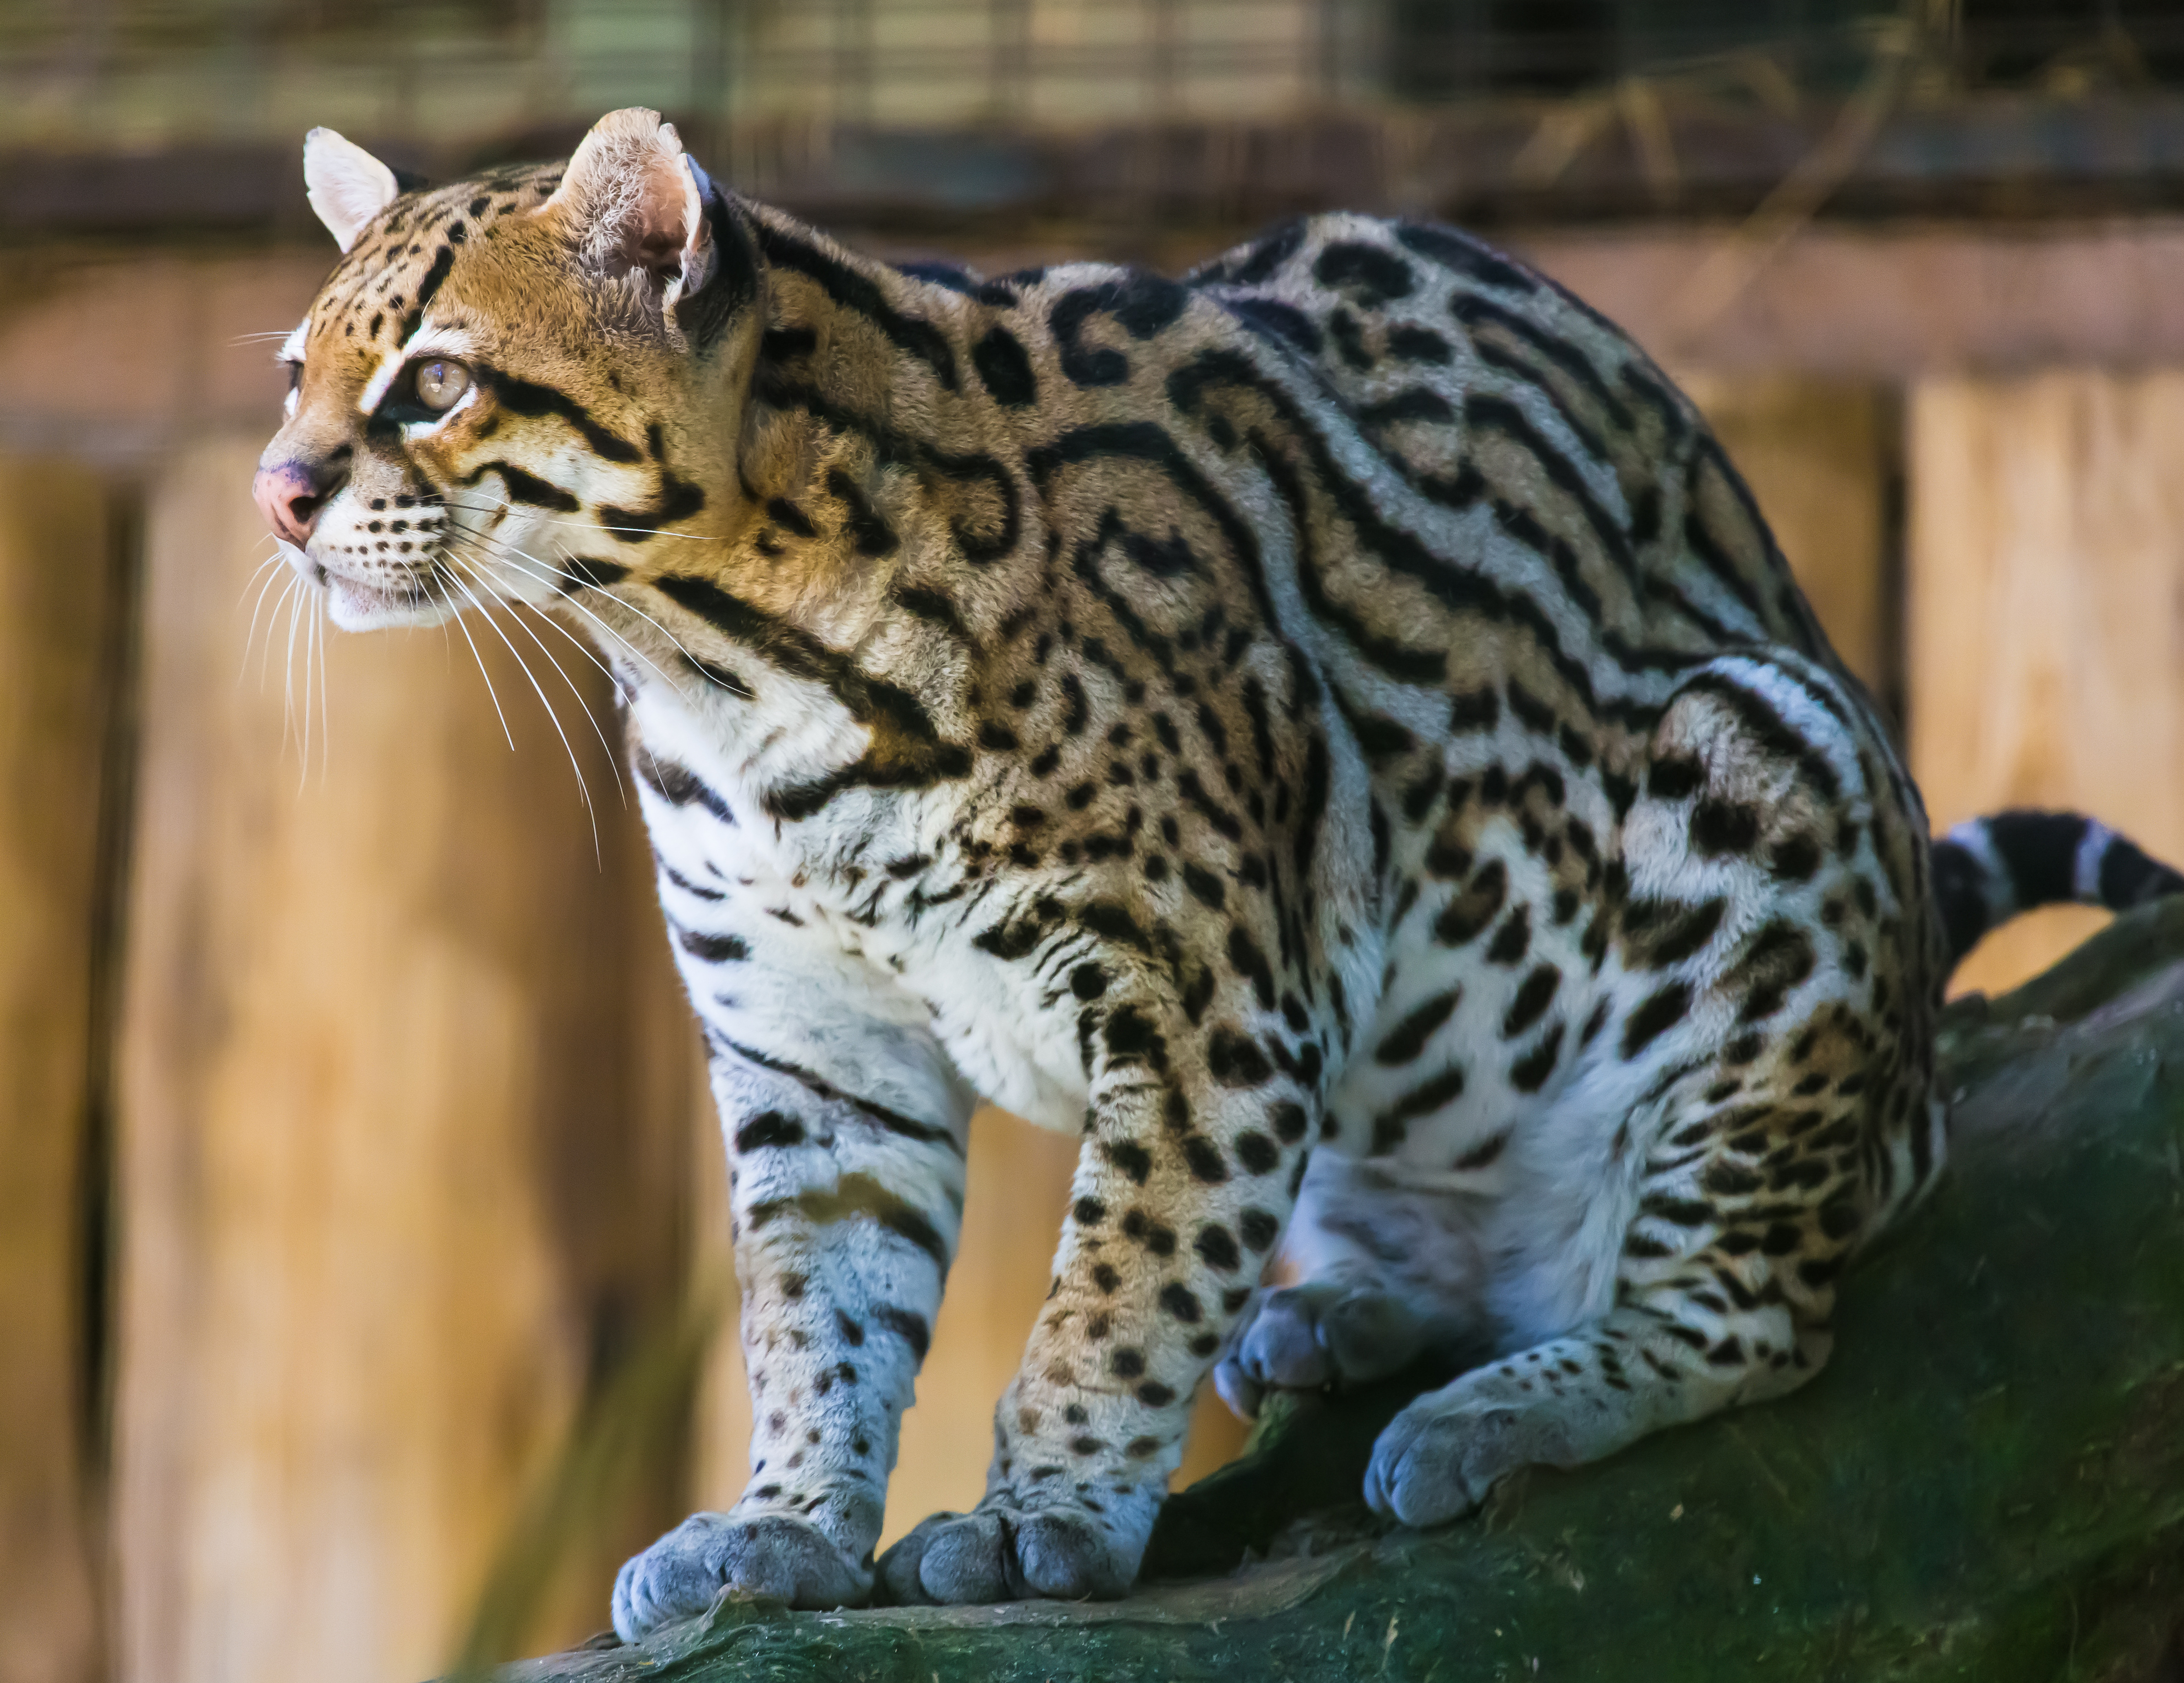 What is an ocelot scientifically called?